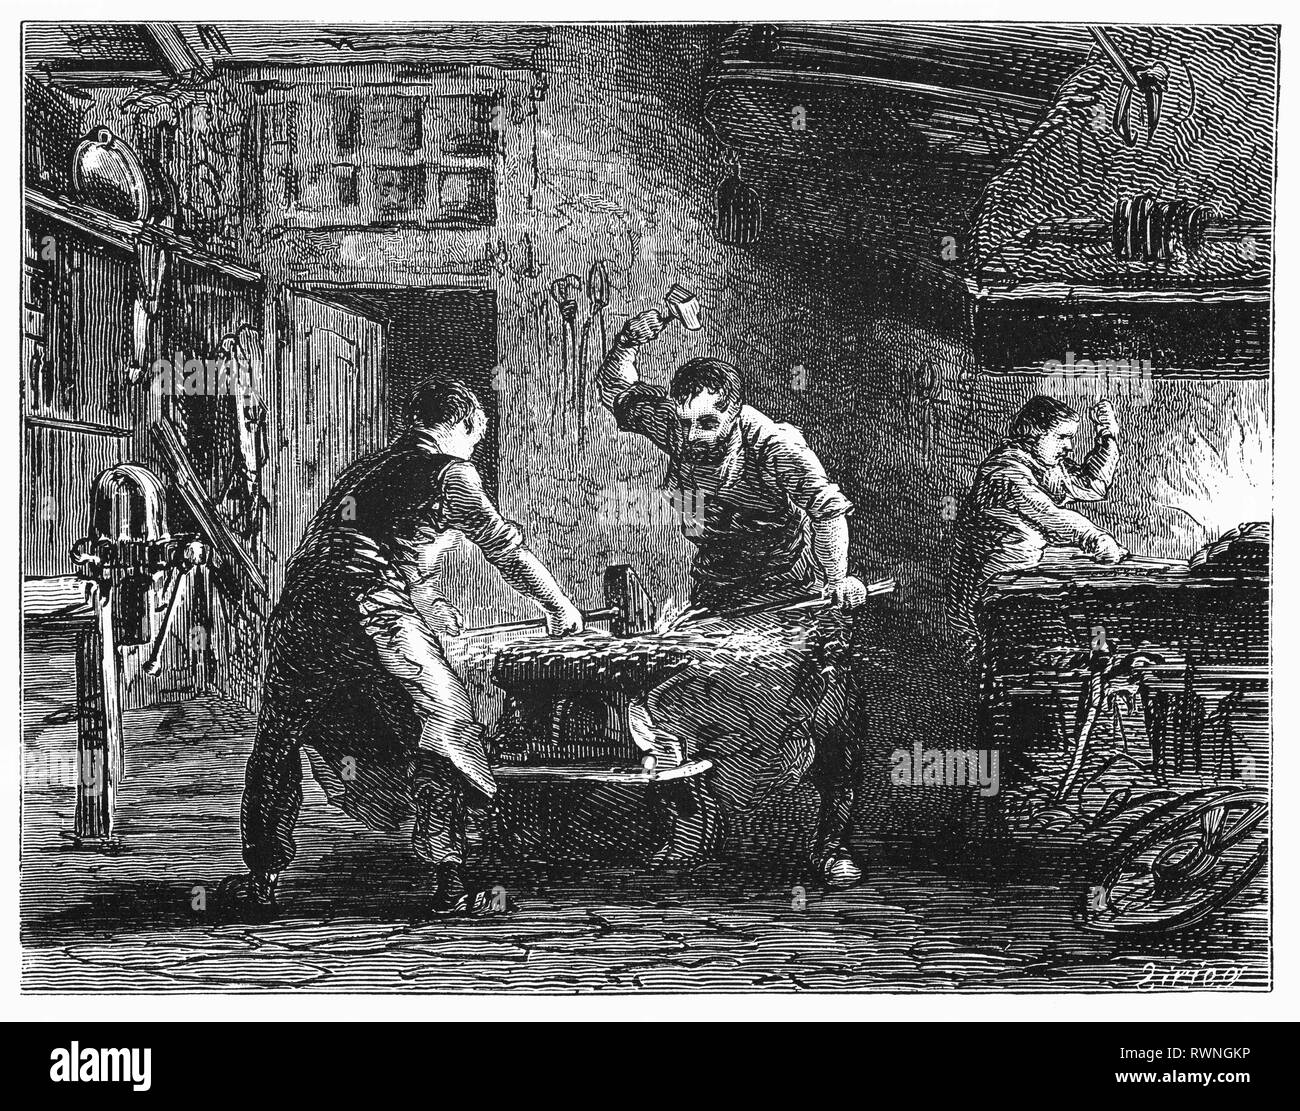 Blacksmiths shaping metal, the blows from the sledgehammer spread a horizontal fountain of fire, where the black face of the blacksmith was brilliantly illuminated; Haarlem, the Netherlands. From the Camera Obscura, a collection of Dutch humorous-realistic essays, stories and sketches in which Hildebrand, the author, takes an ironic look at the behavior of the 'well-to-do', finding  them bourgeois and without a good word for them. Stock Photo